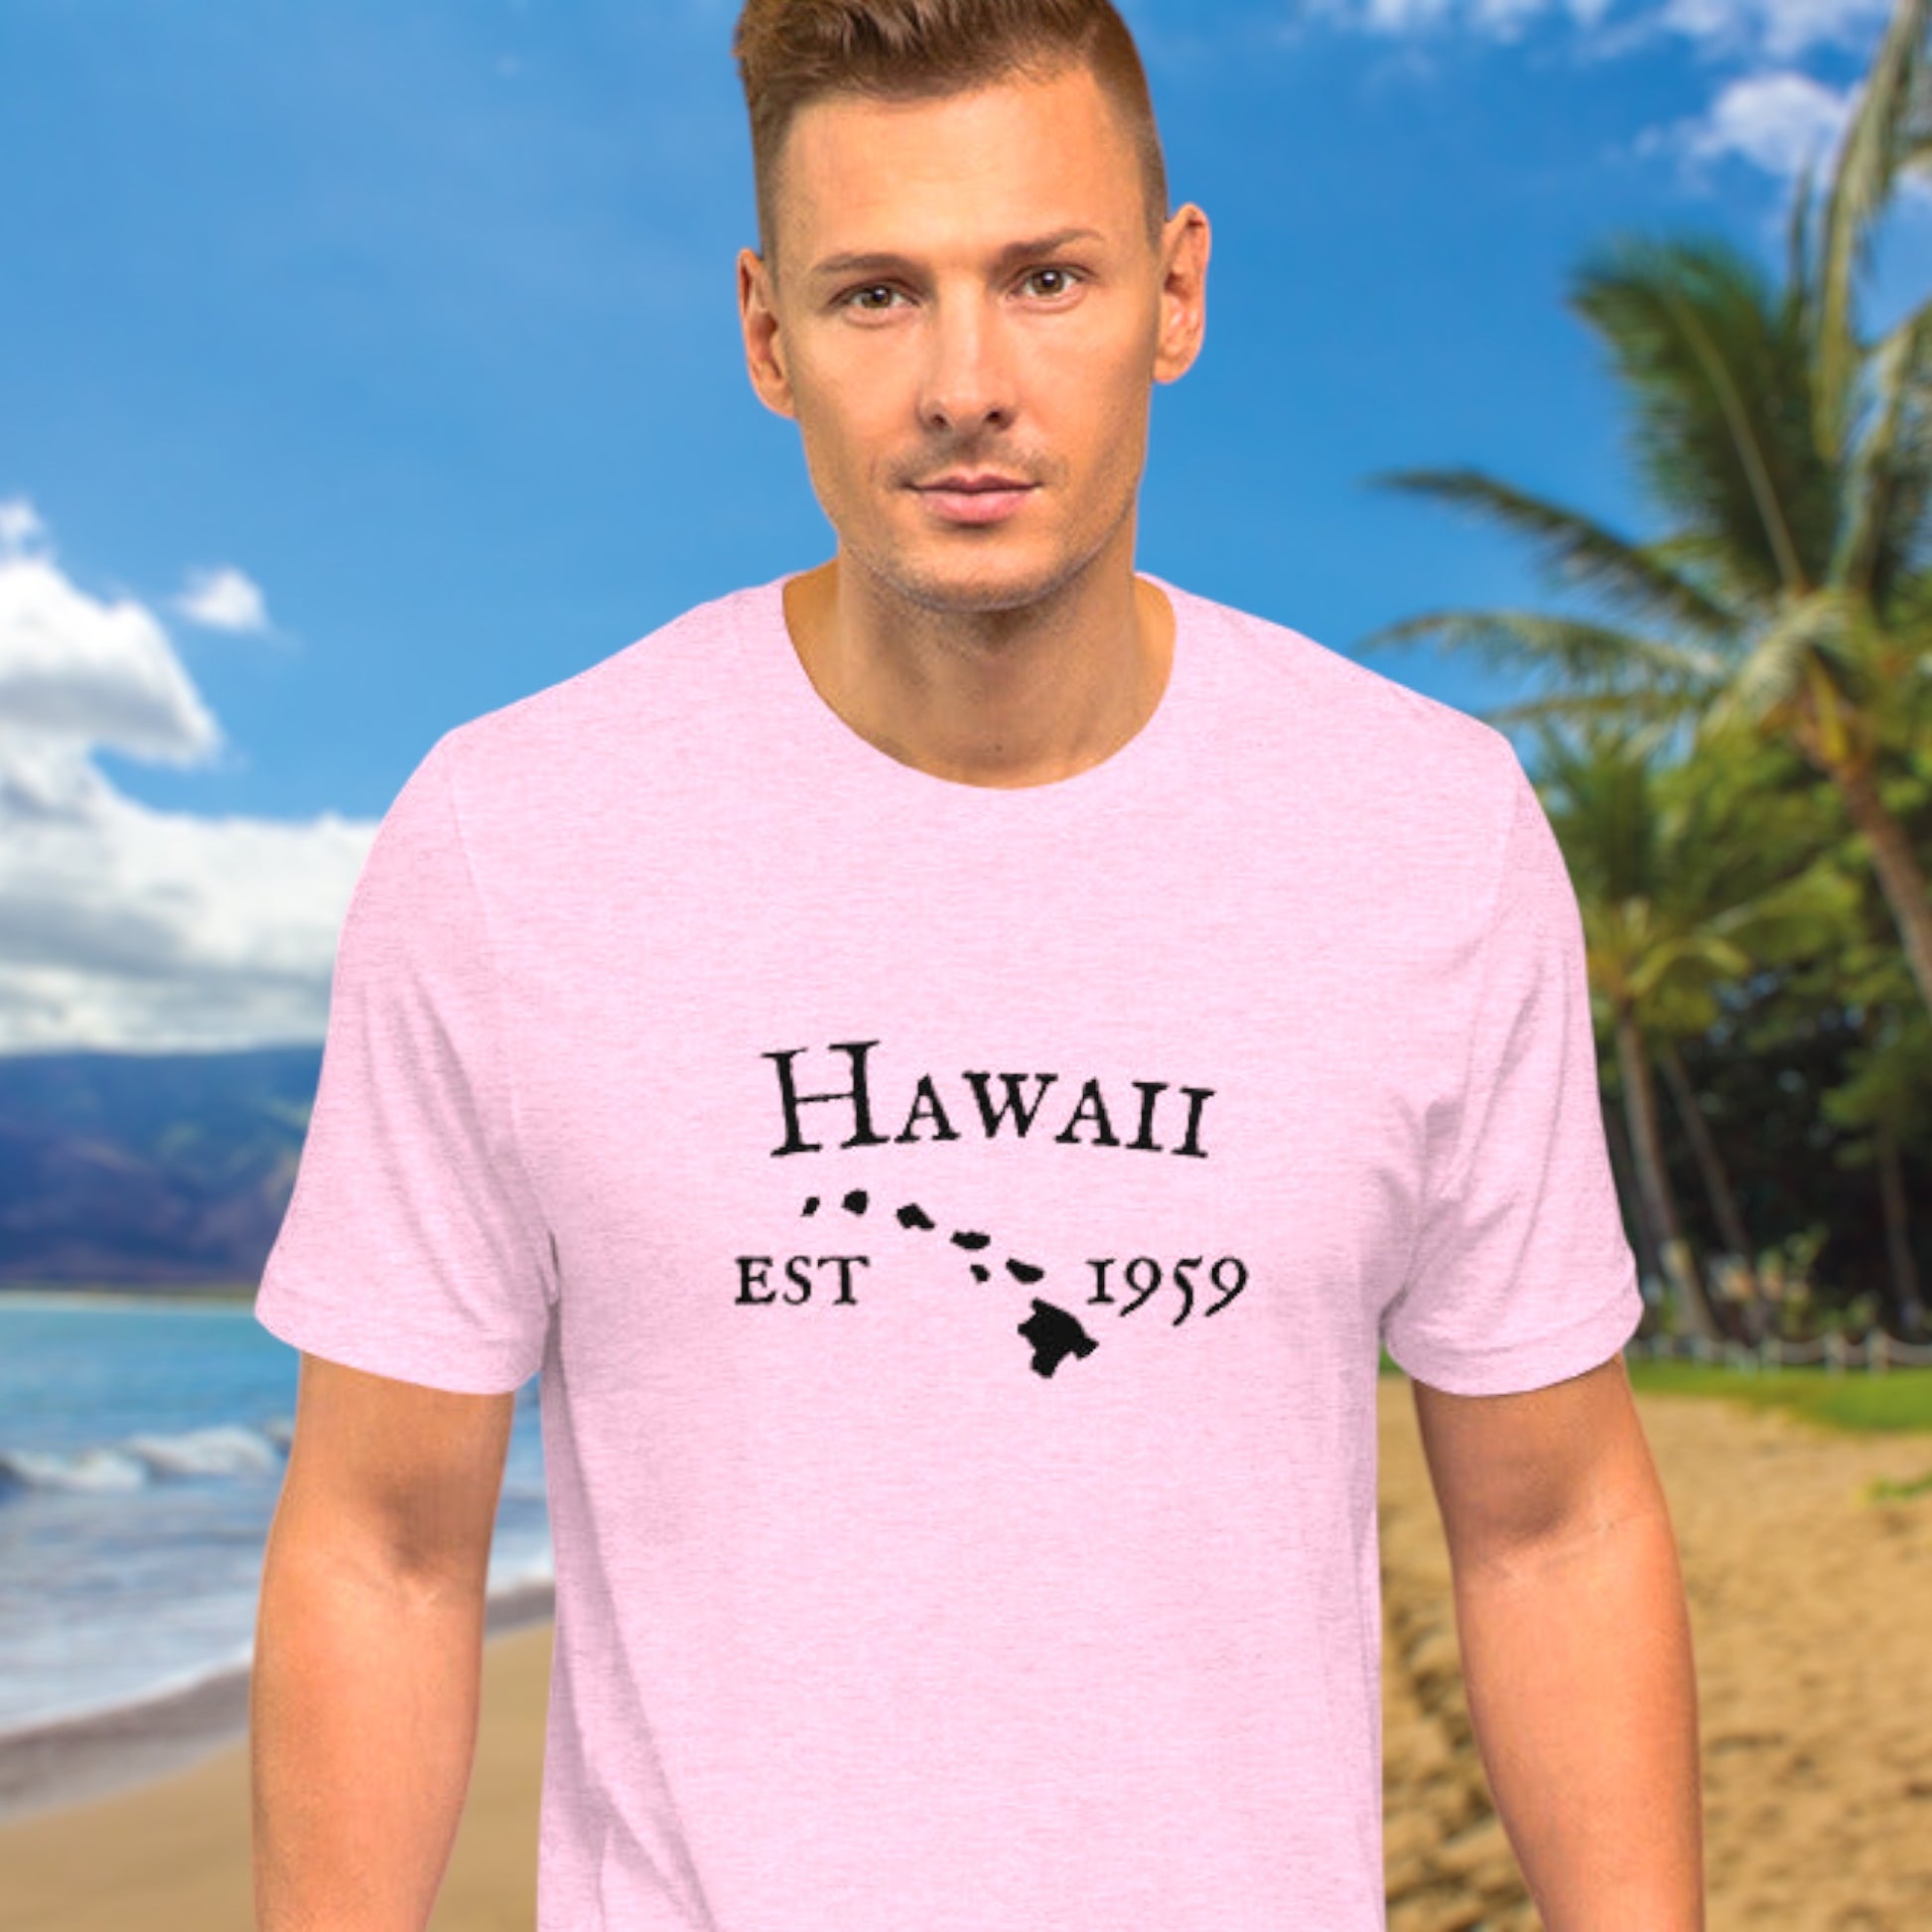 "Hawaii Established In 1959" T-Shirt - Weave Got Gifts - Unique Gifts You Won’t Find Anywhere Else!